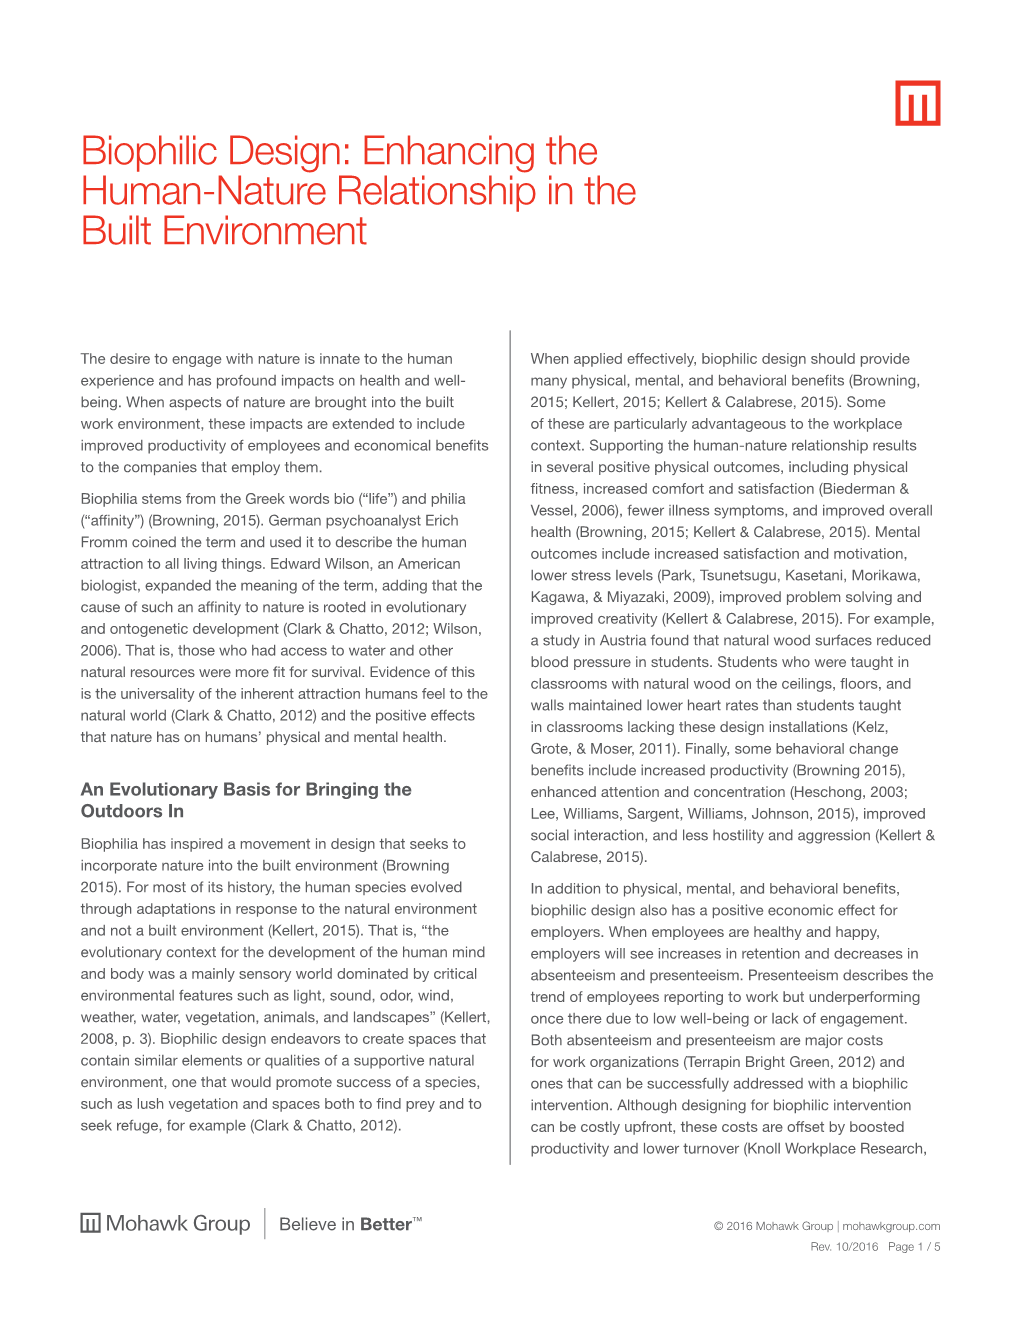 Biophilic Design: Enhancing the Human-Nature Relationship in the Built Environment